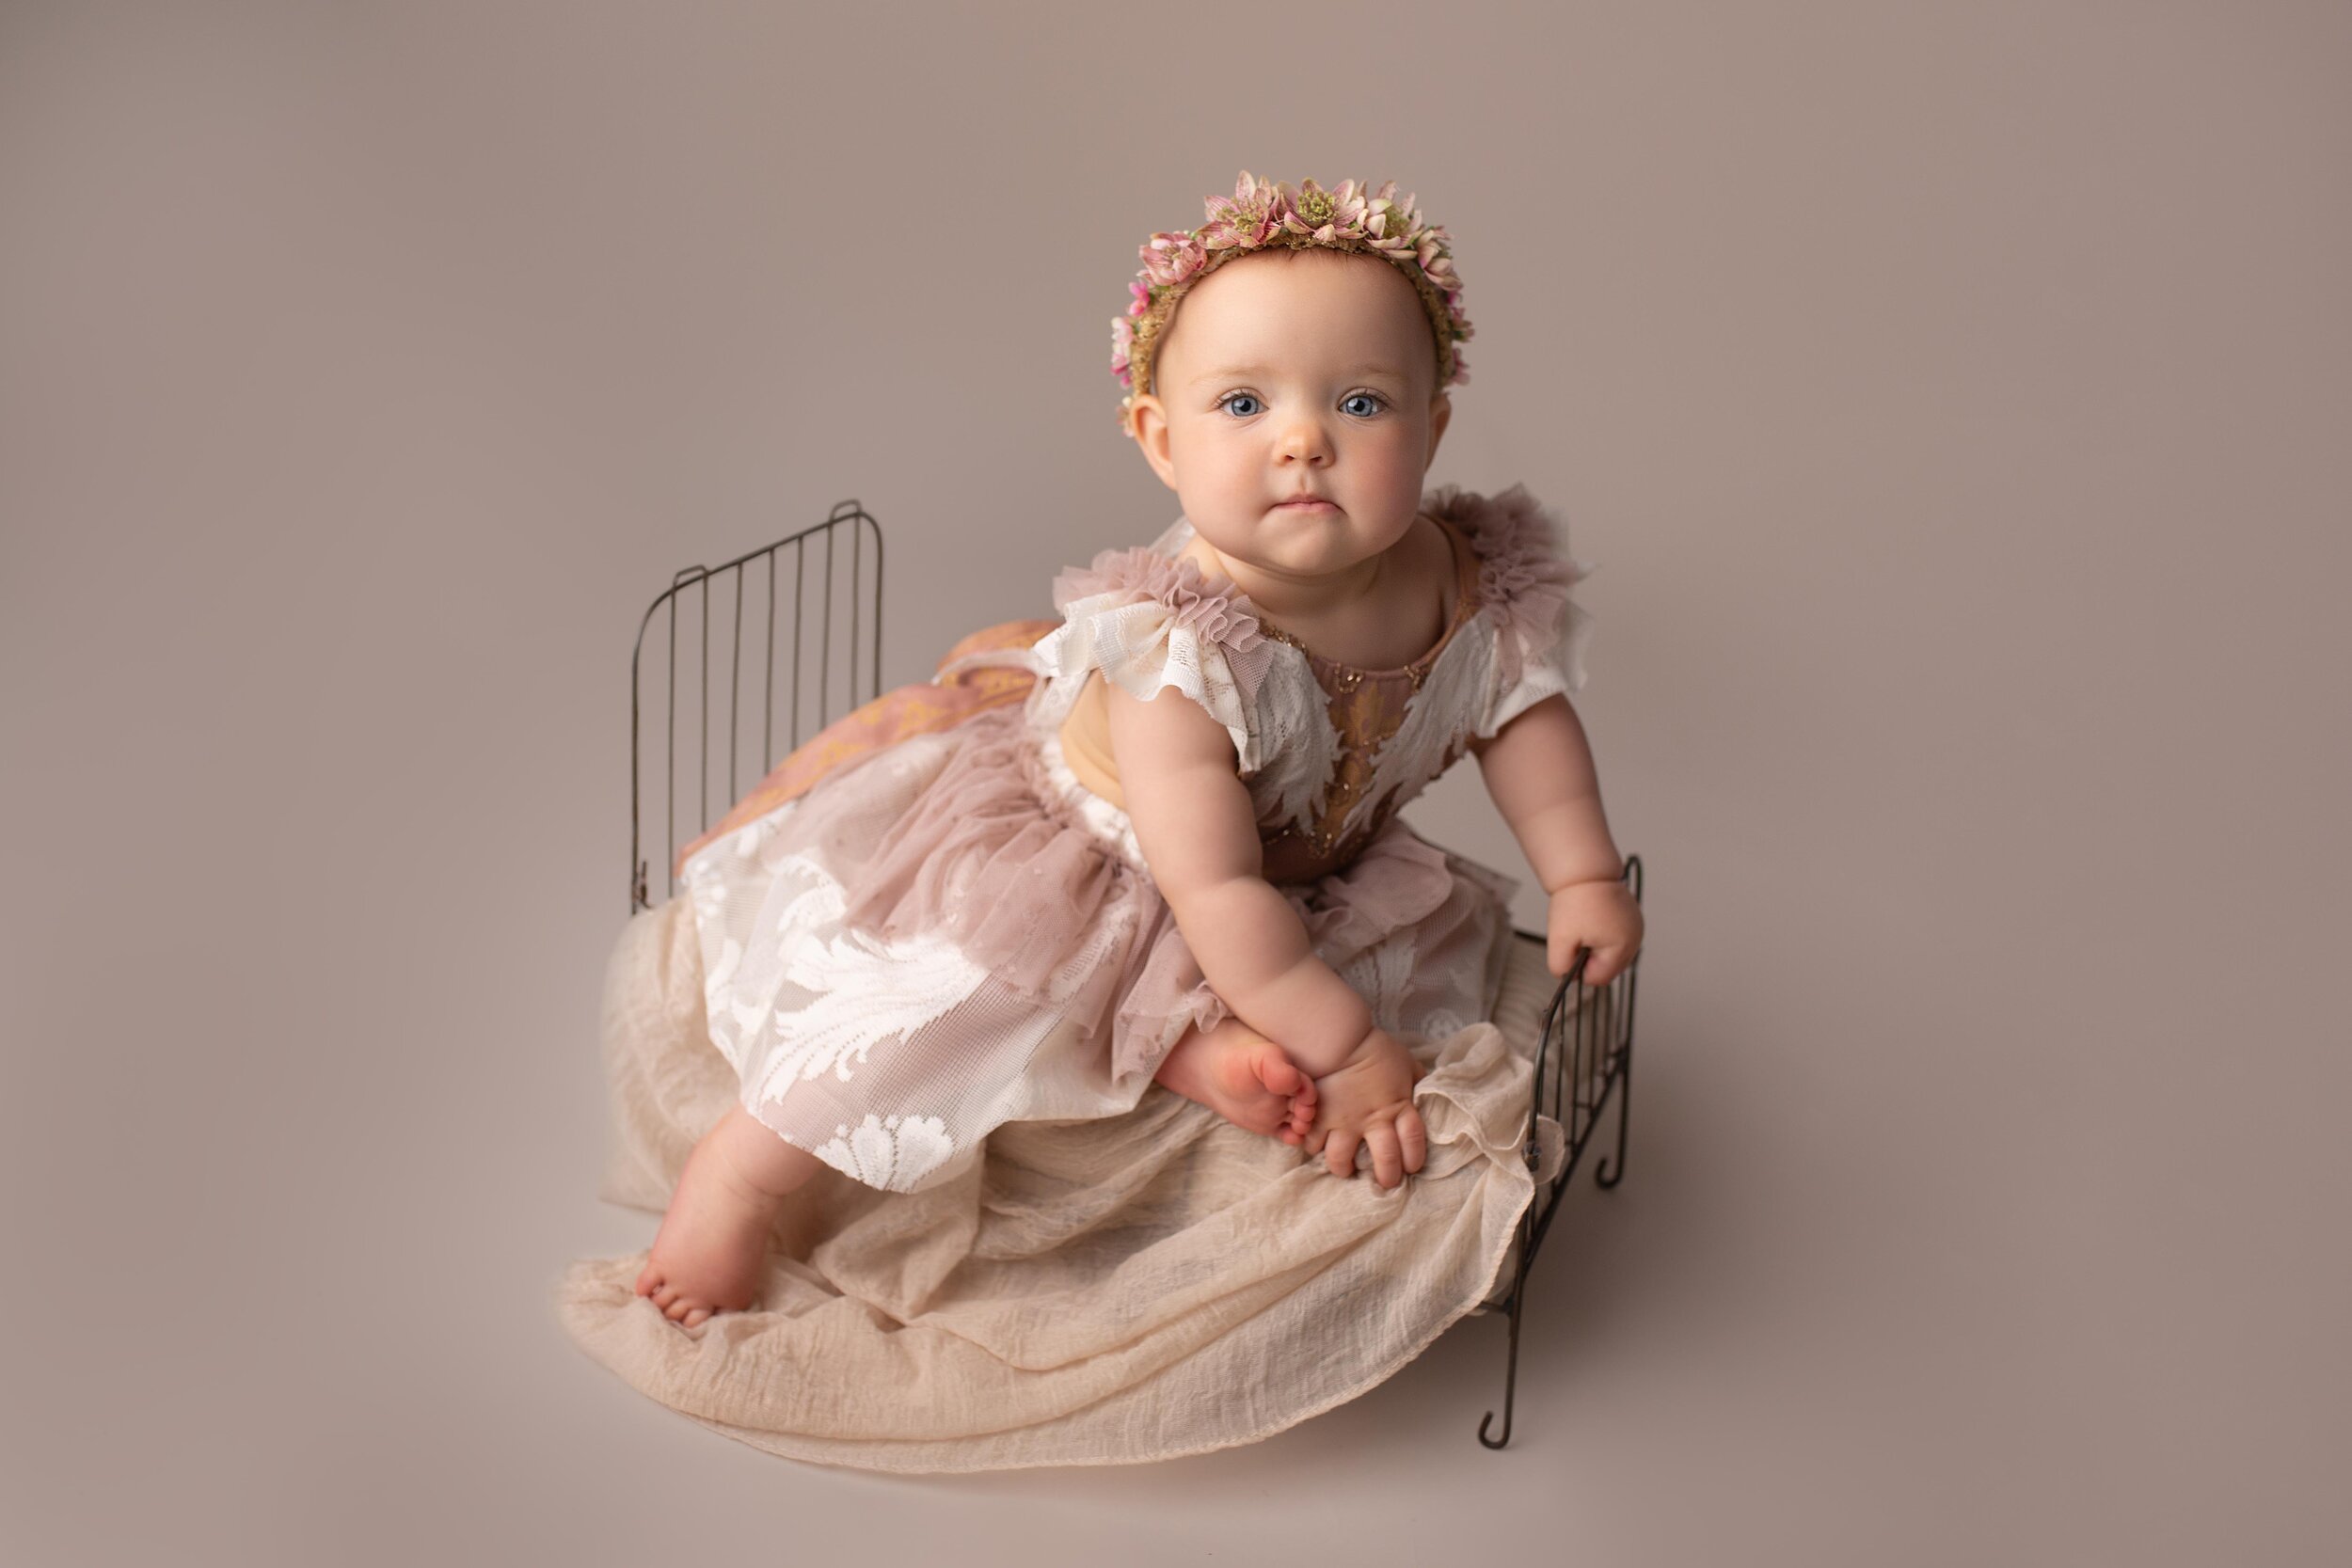 pretty-dress-milestone-session-6-months-old-sitter-photography-lea-cooper-photography.jpg